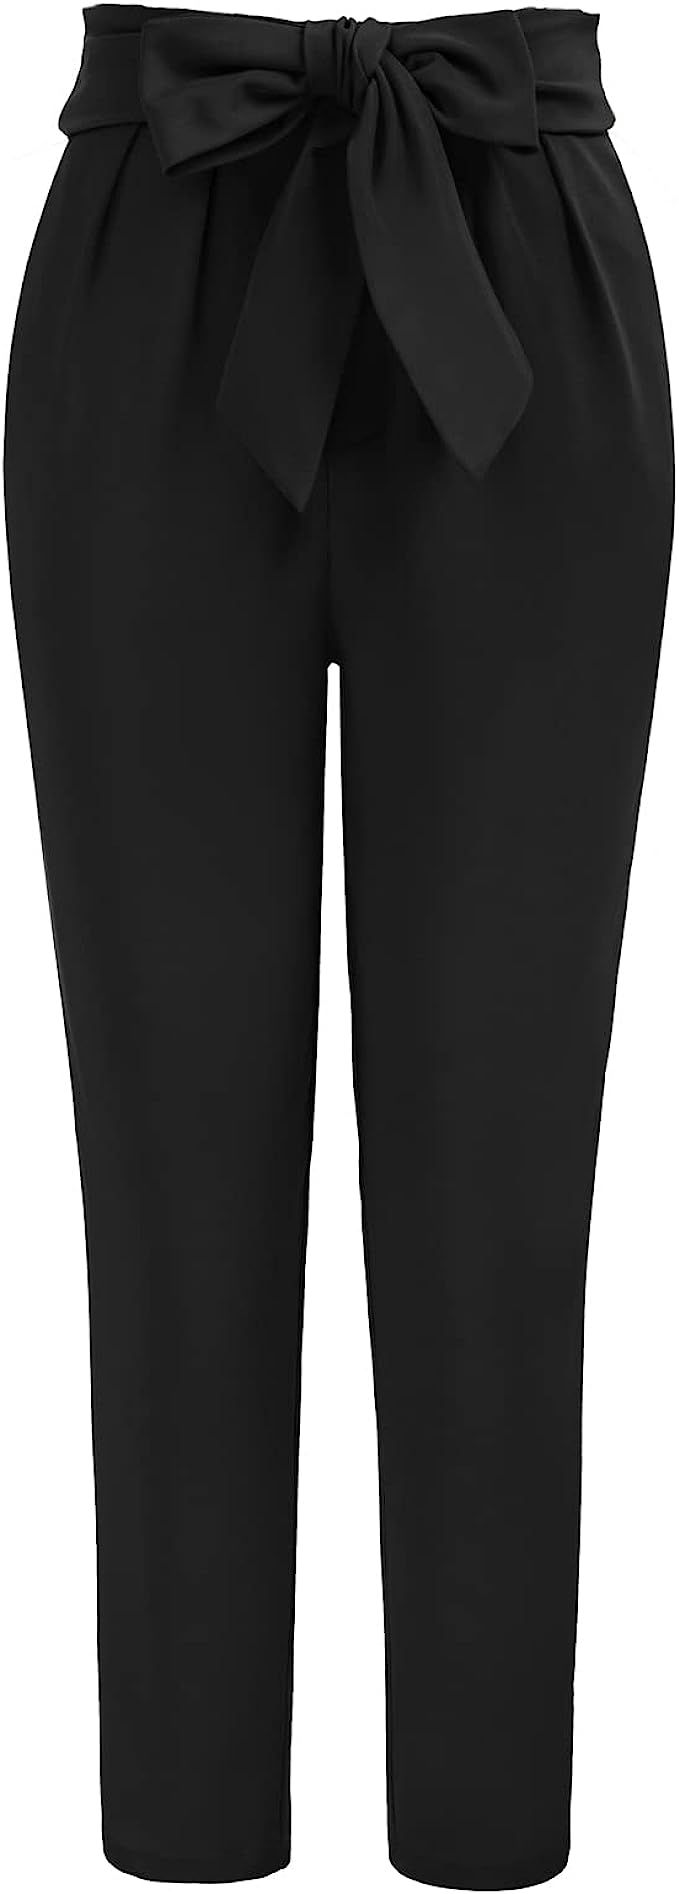 GRACE KARIN Women's Cropped Paper Bag Waist Pants with Pockets Office Casual Pencil Pants Slim Fi... | Amazon (US)